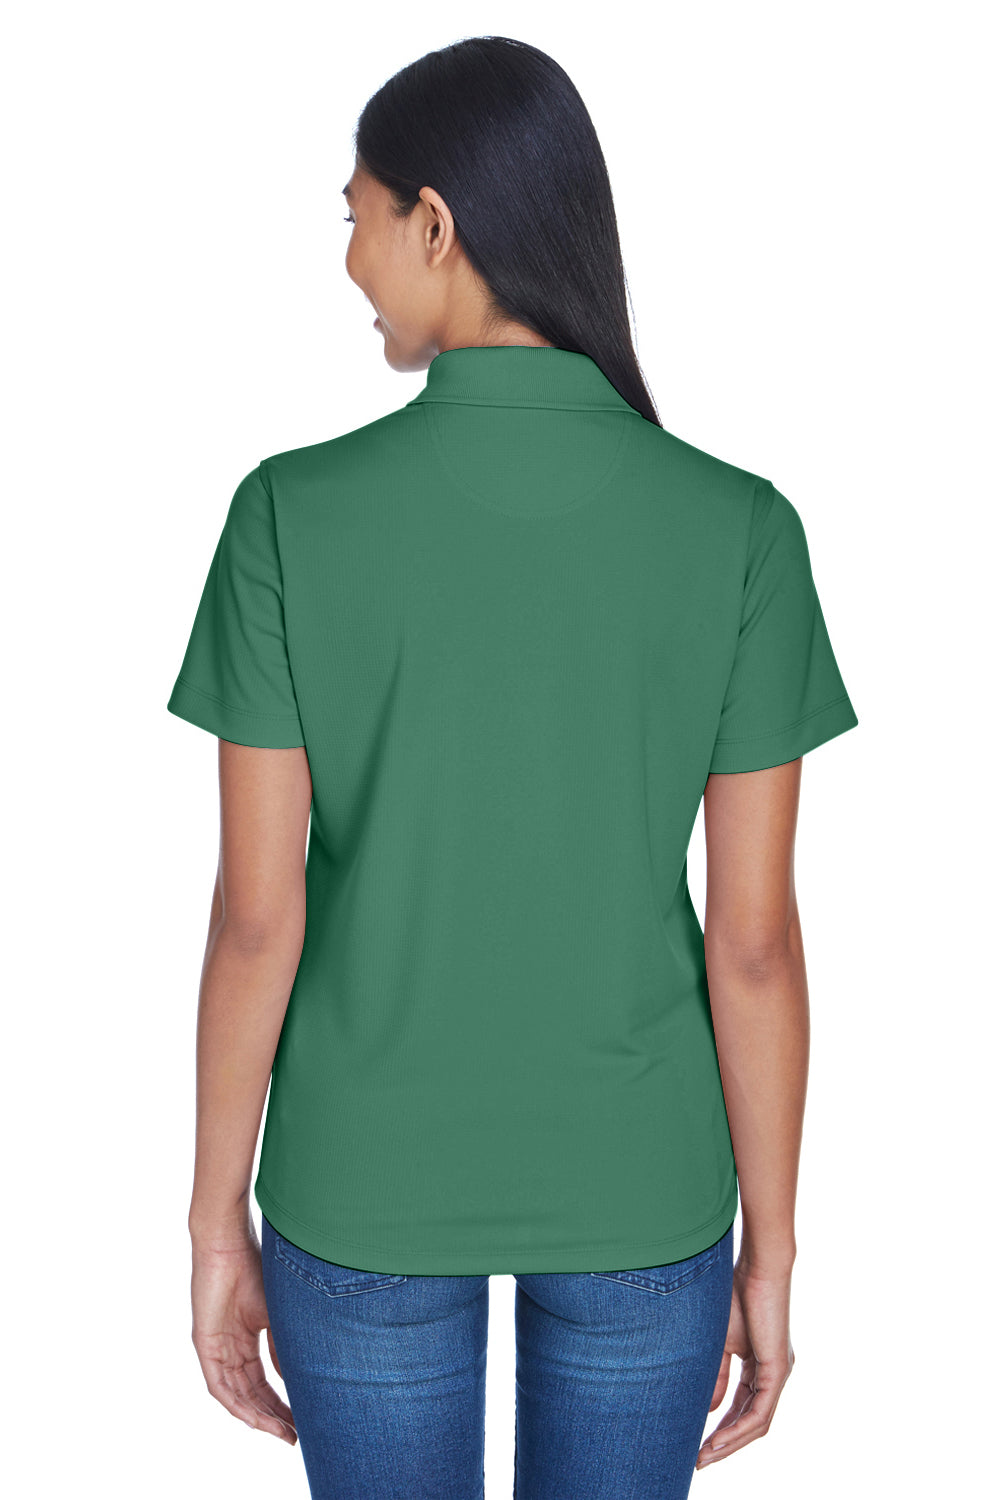 UltraClub 8445L Womens Cool & Dry Performance Moisture Wicking Short Sleeve Polo Shirt Forest Green Back